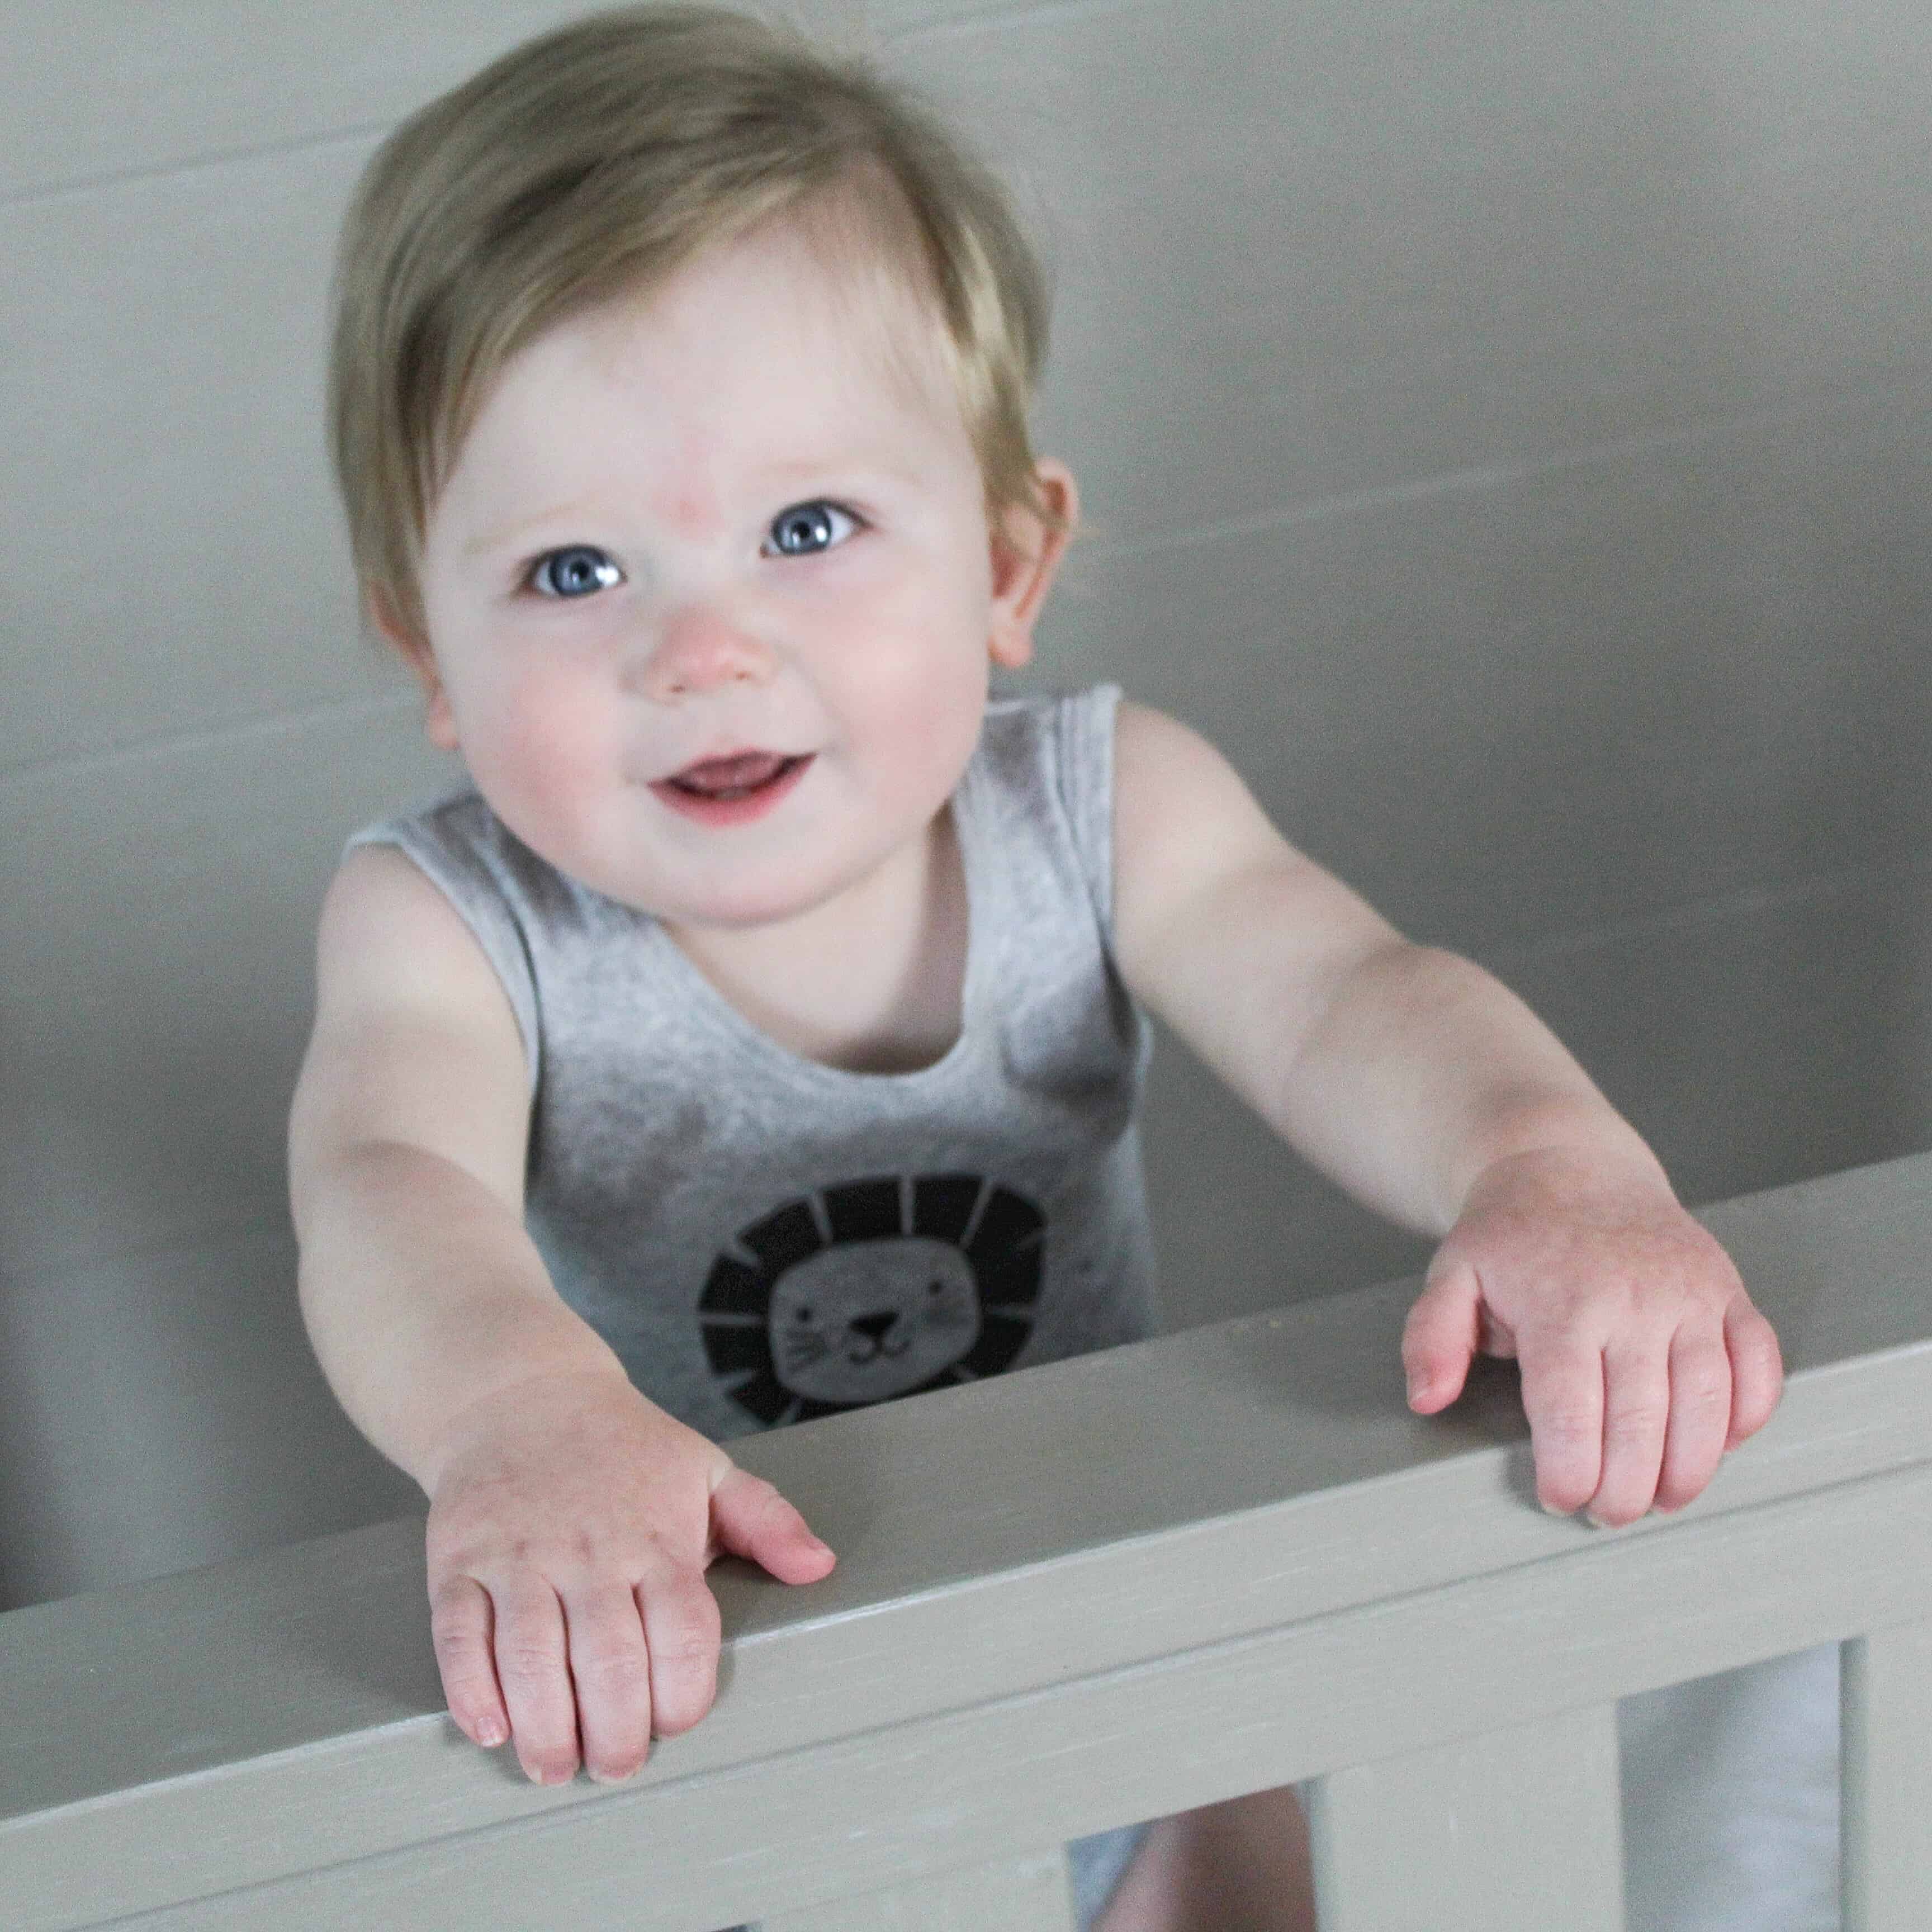 baby standing in crib